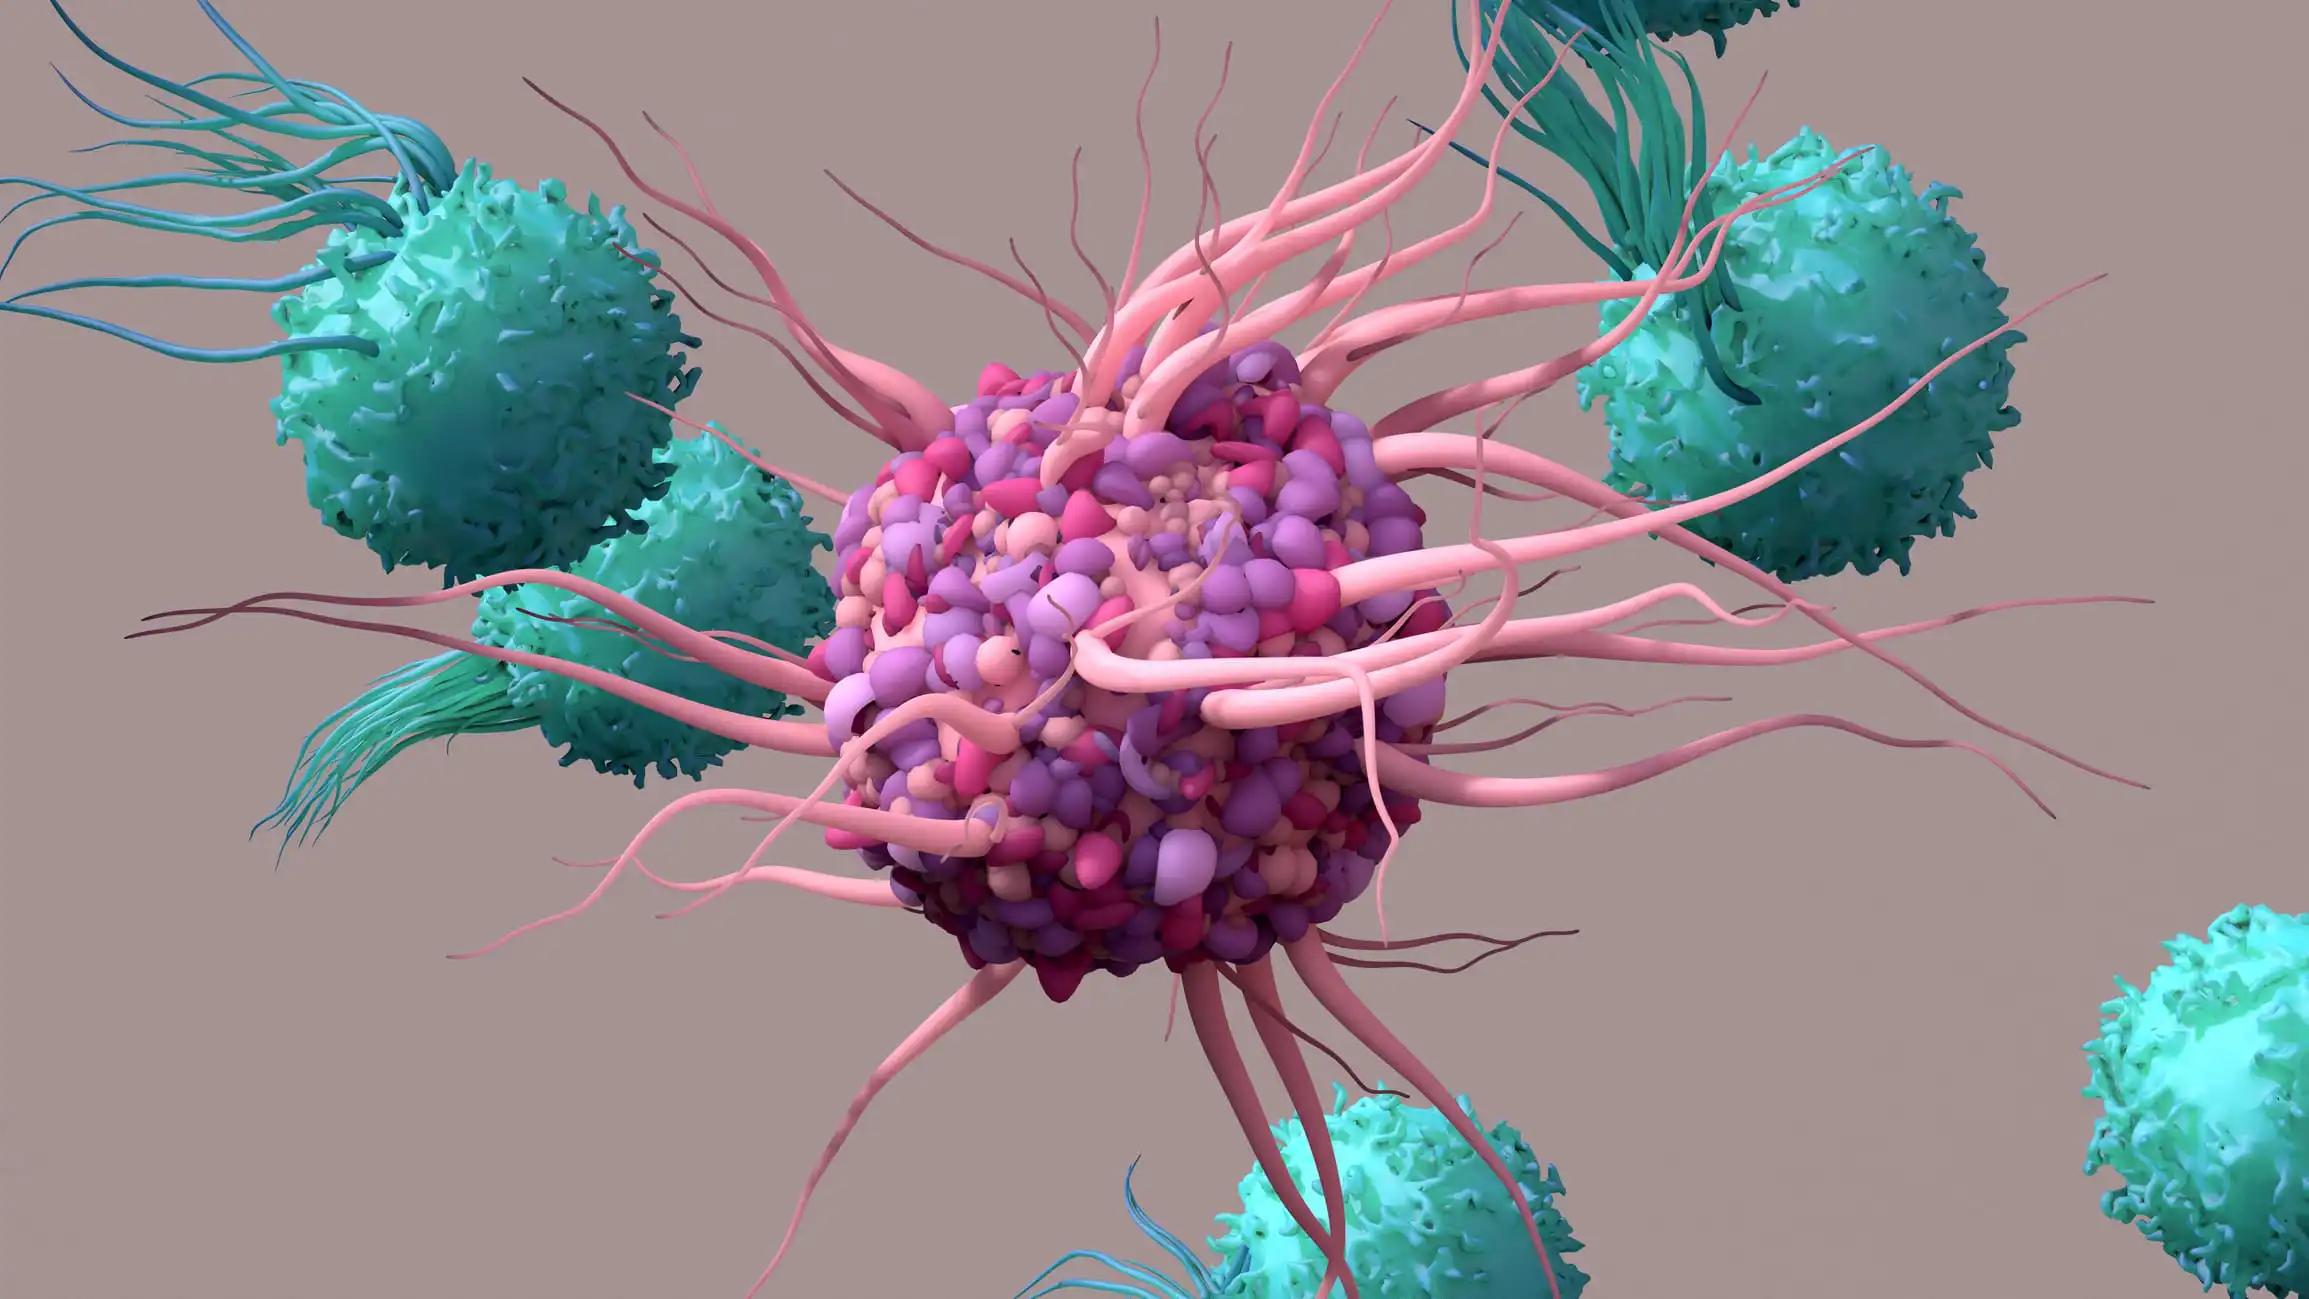 Dendritic cell interacts with immune T cells